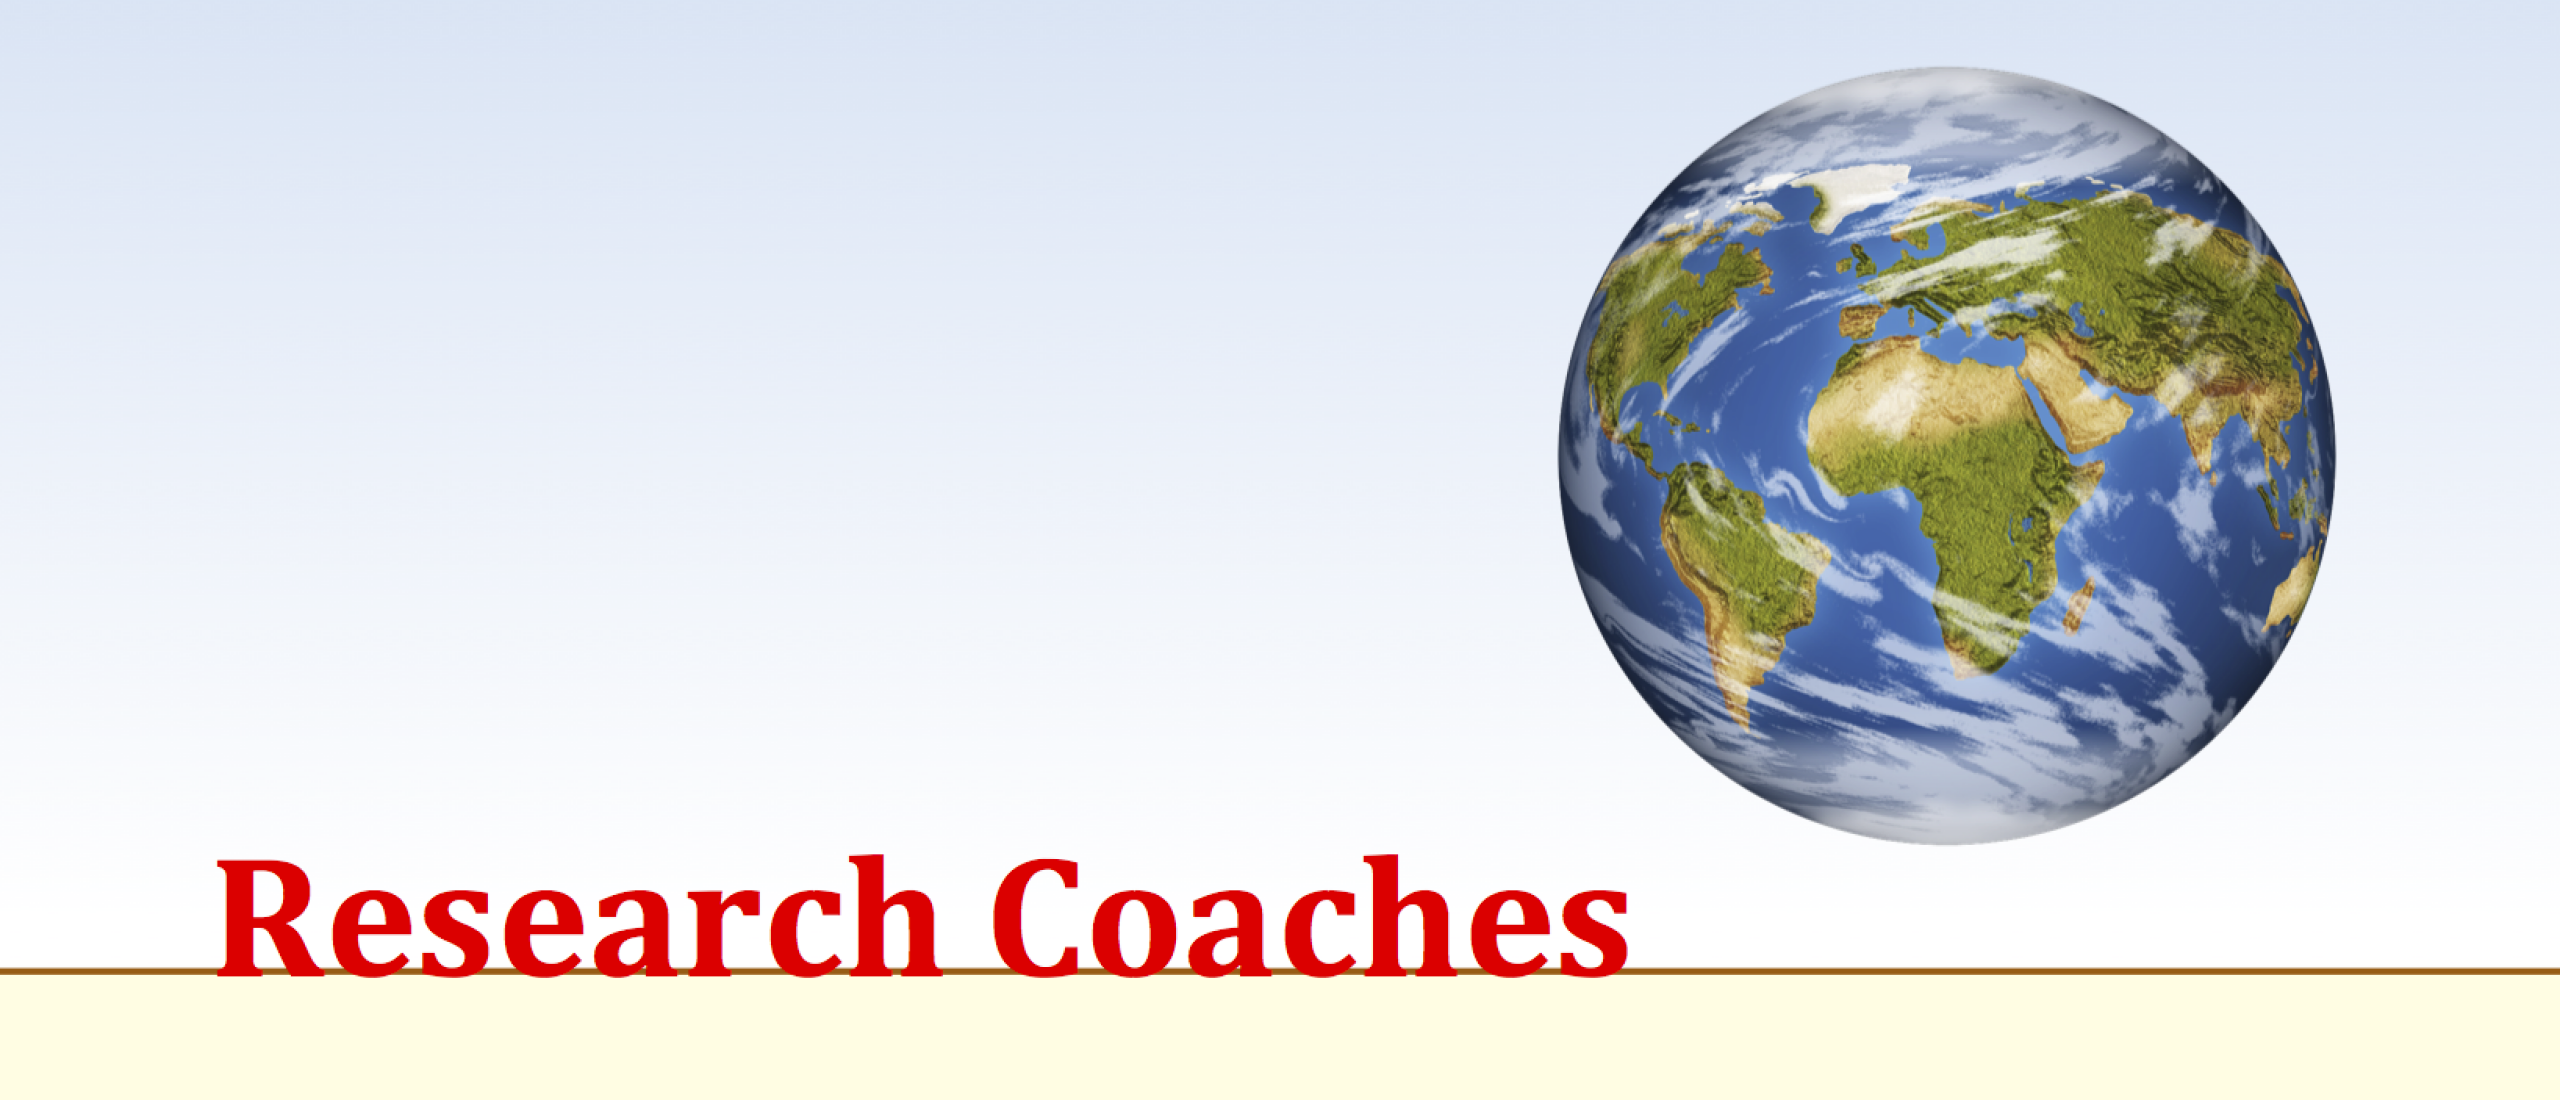 Research Coaches World Wide